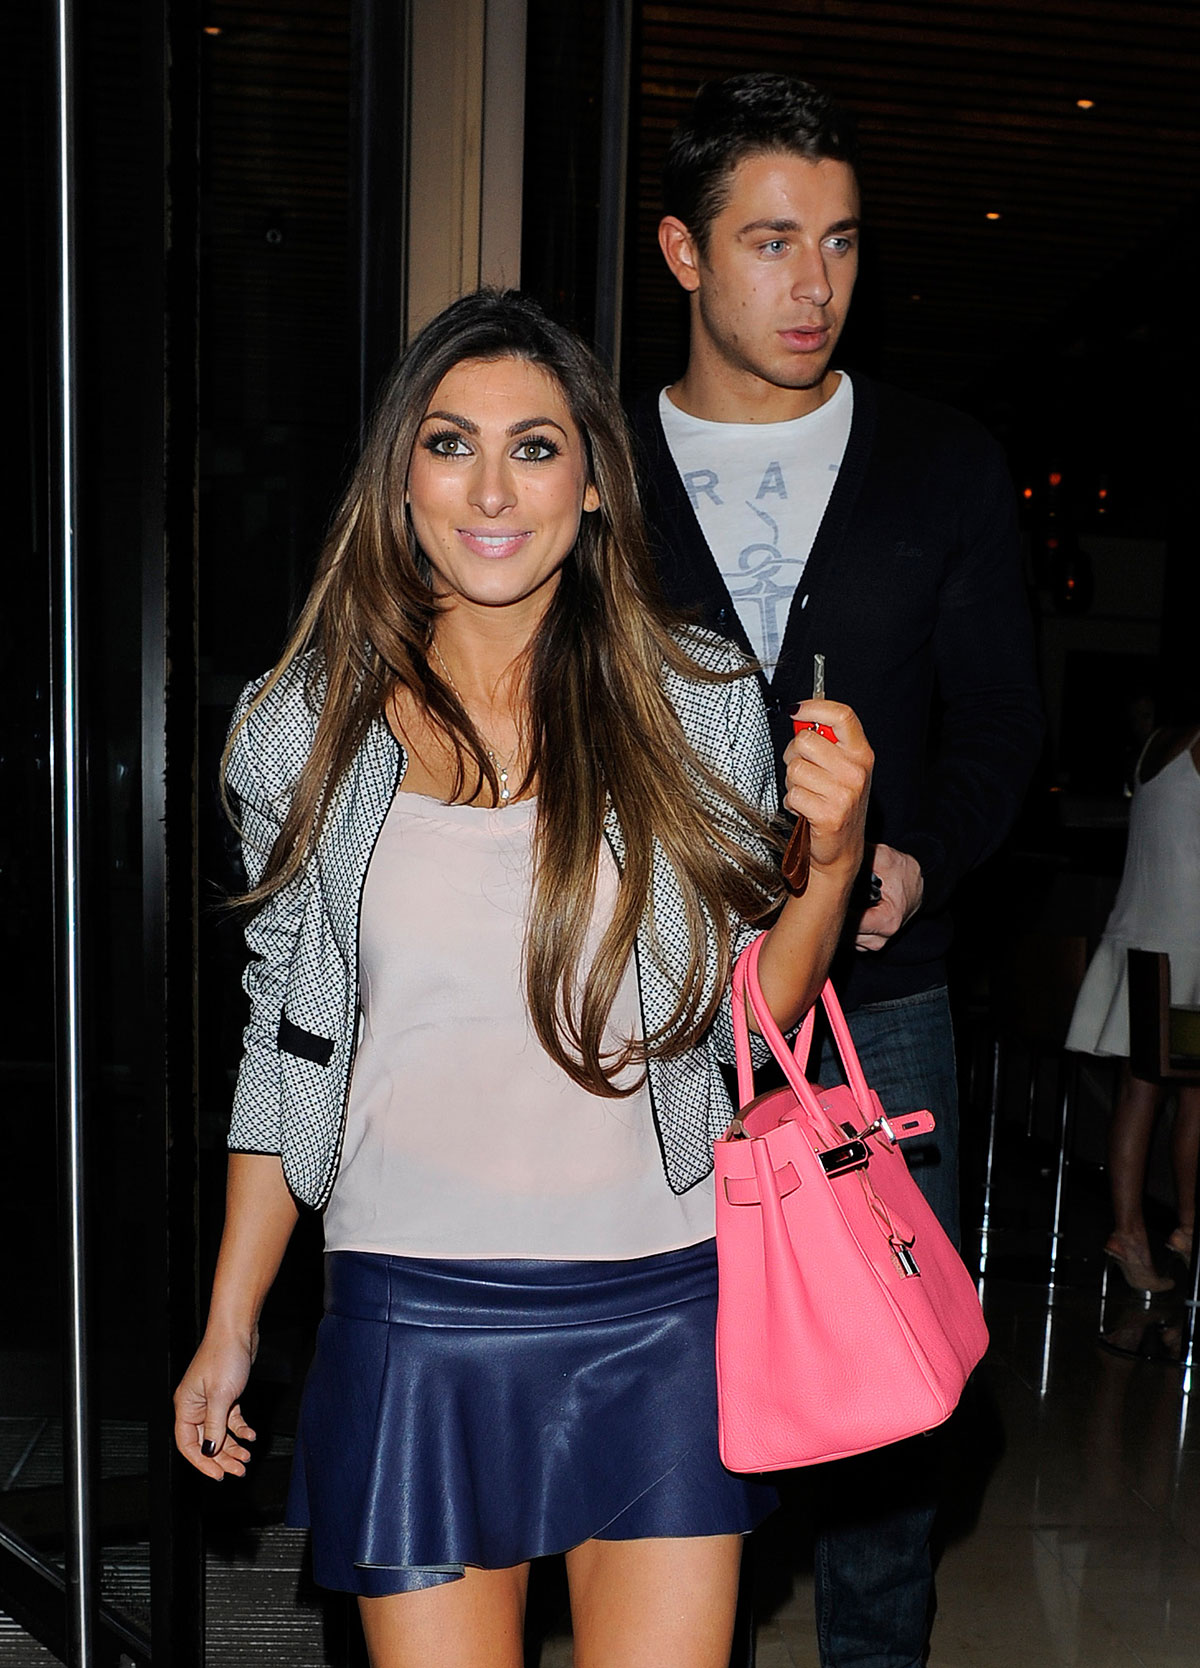 Luisa Zissman attends the Total Minx launch party